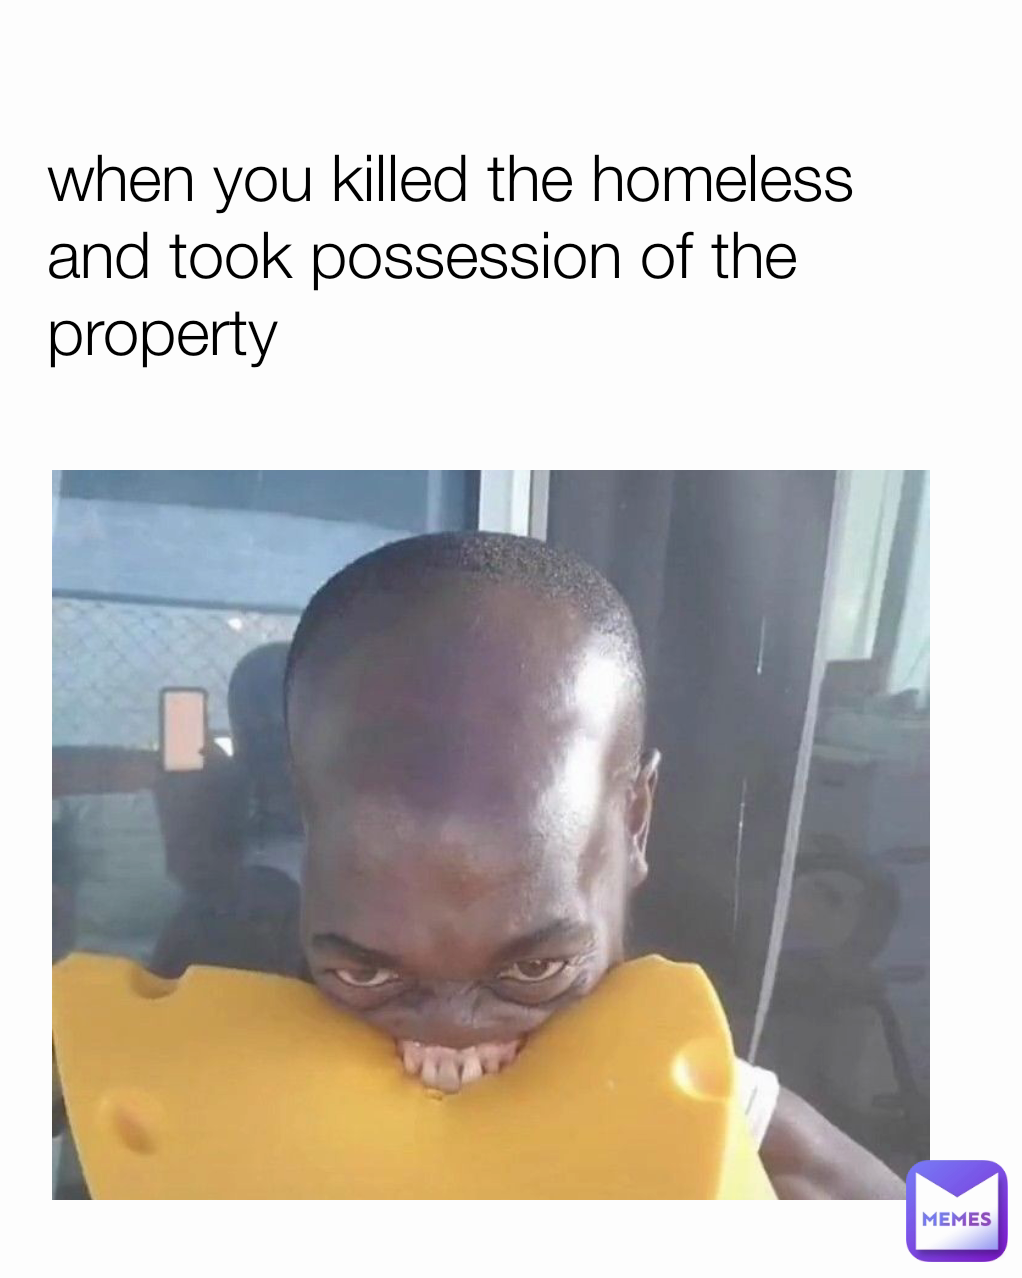 when you killed the homeless and took possession of the property